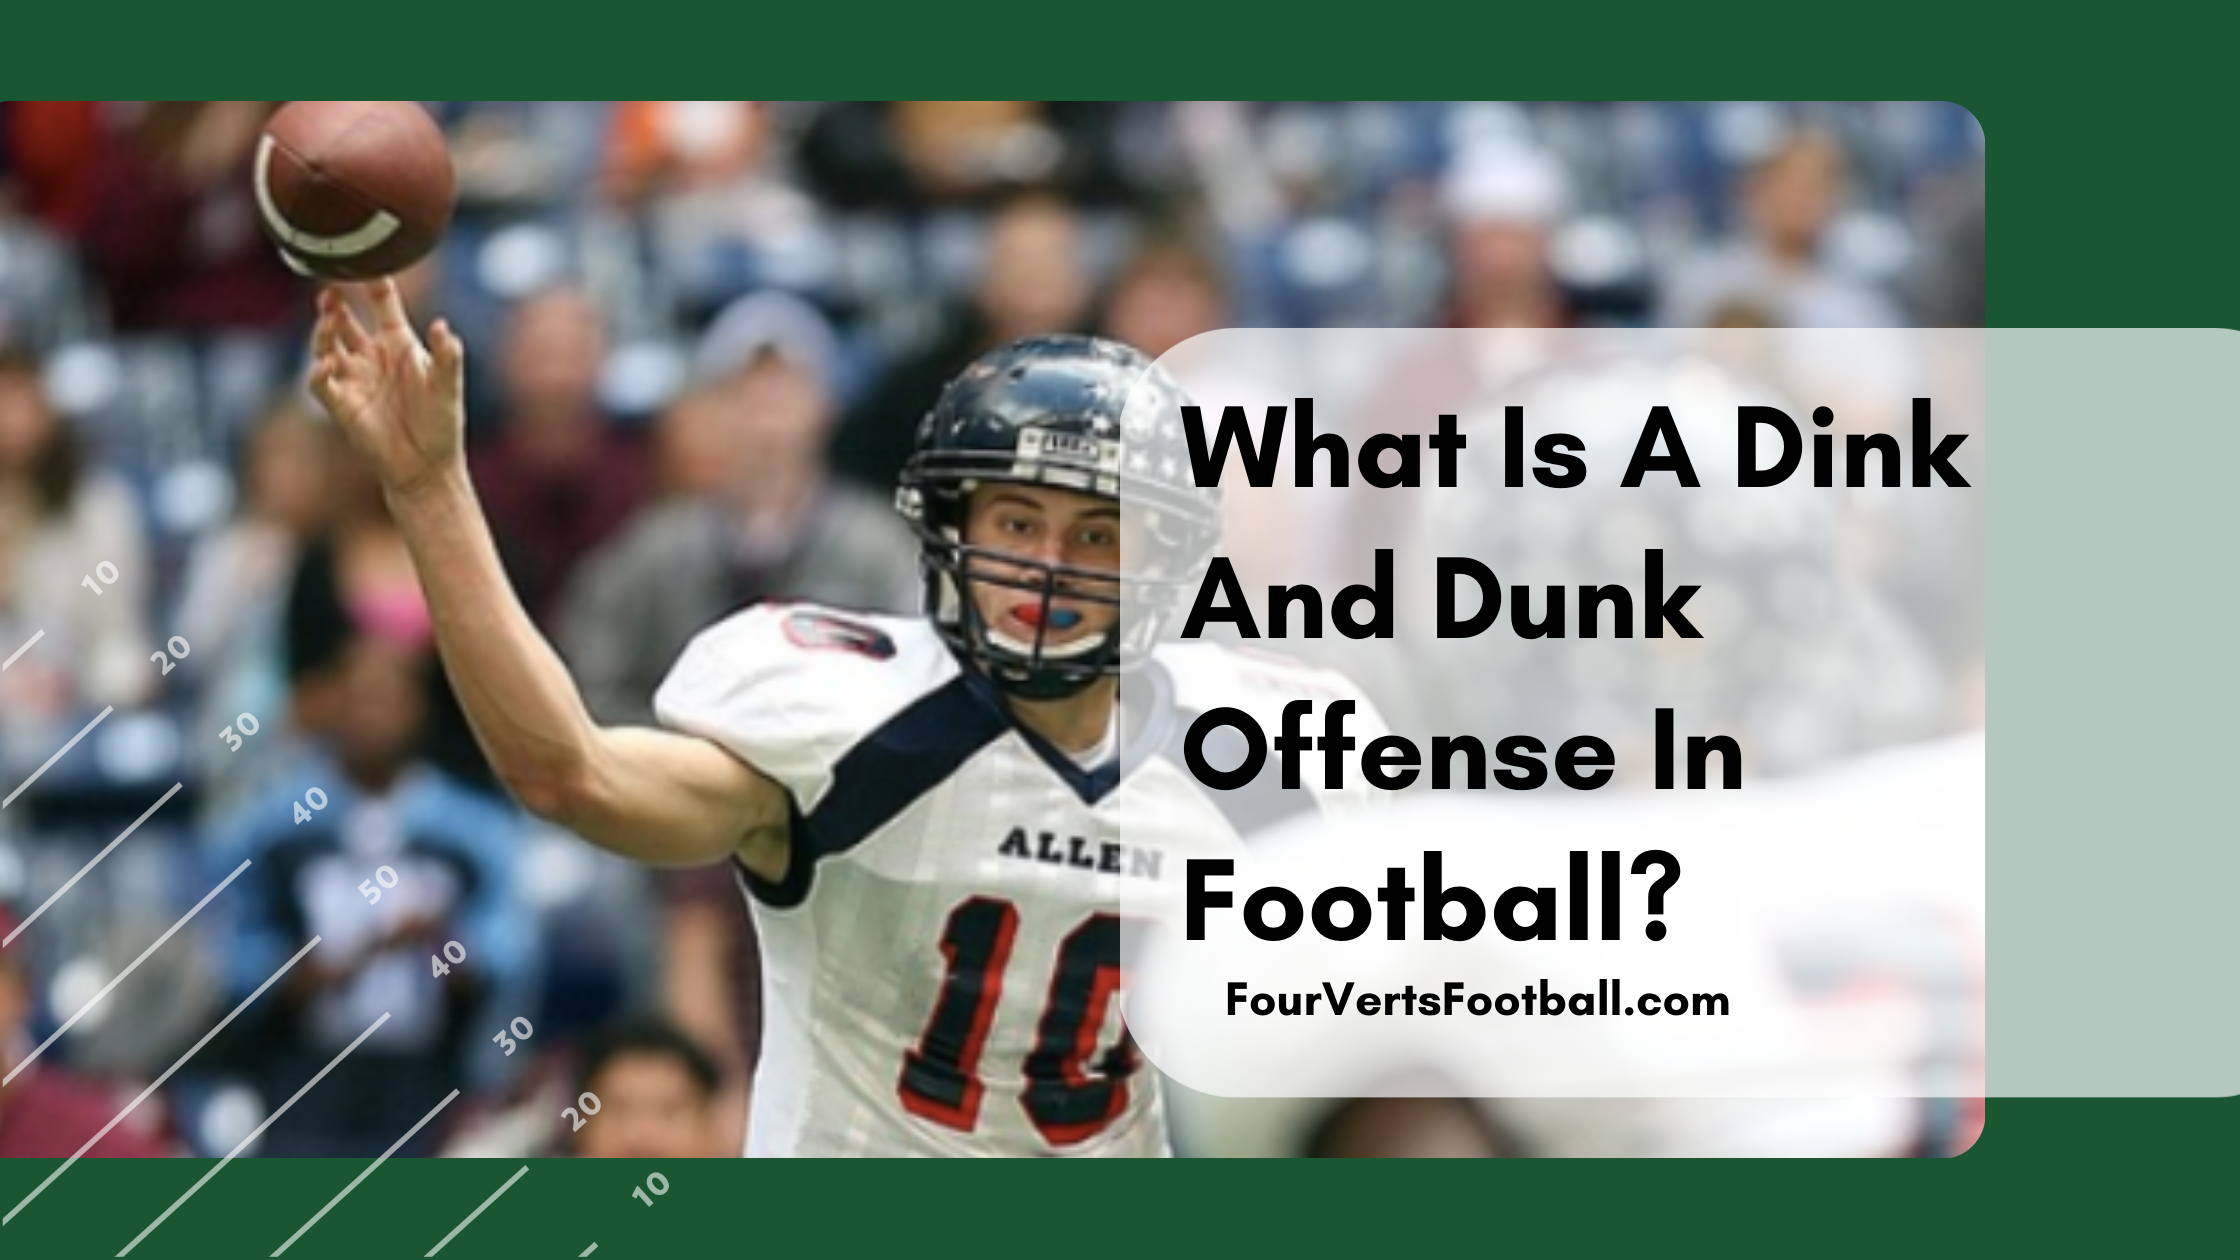 What Is A Dink And Dunk Offense